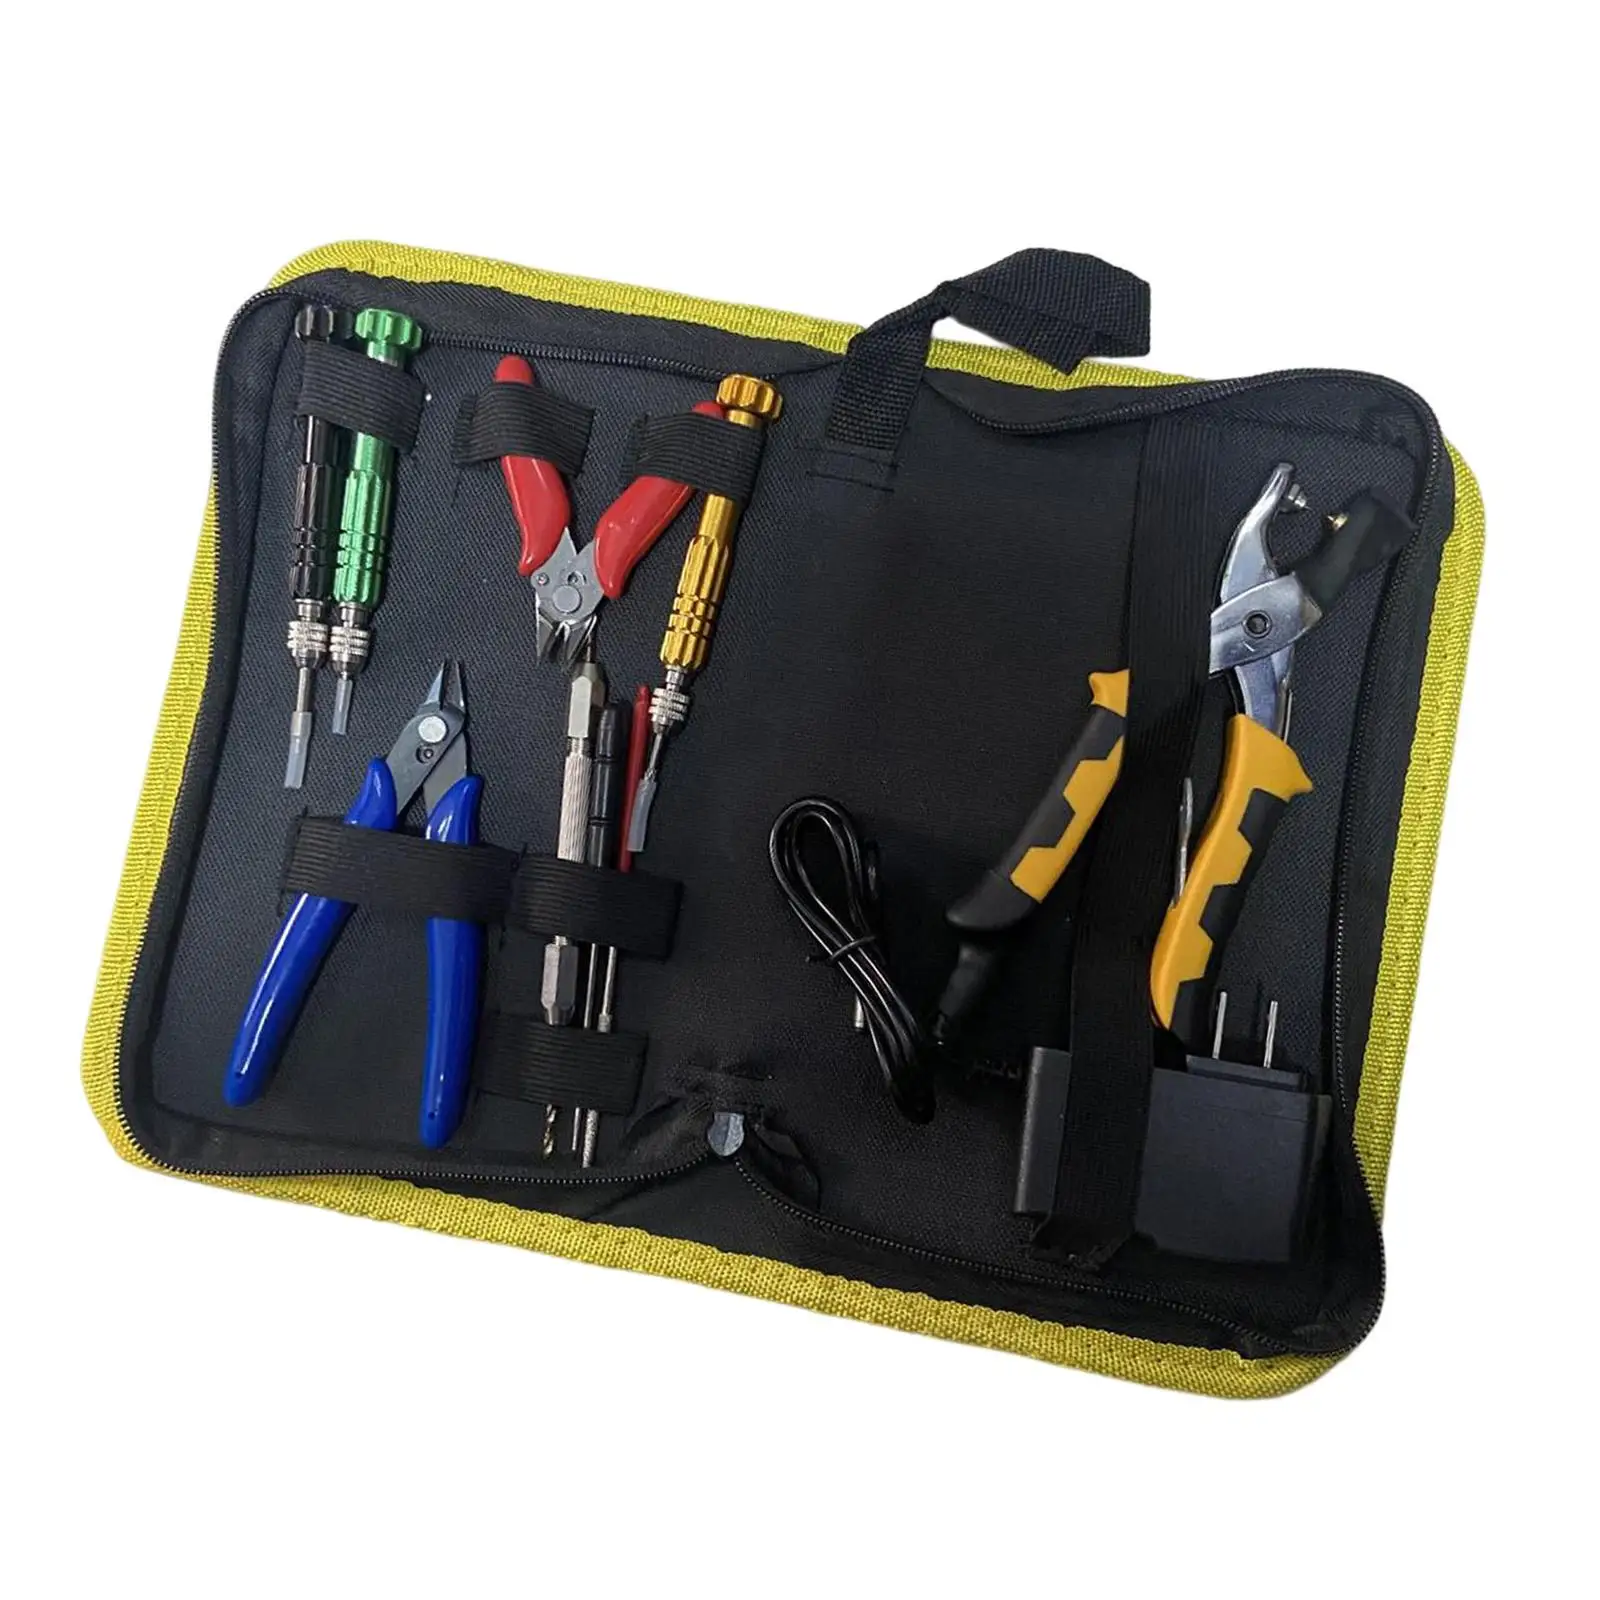 Portable Starting Stringing Clamp Tool Kit Stringing Machine Tools with Bag Badminton Racket Hot Pressure Plier for Restring